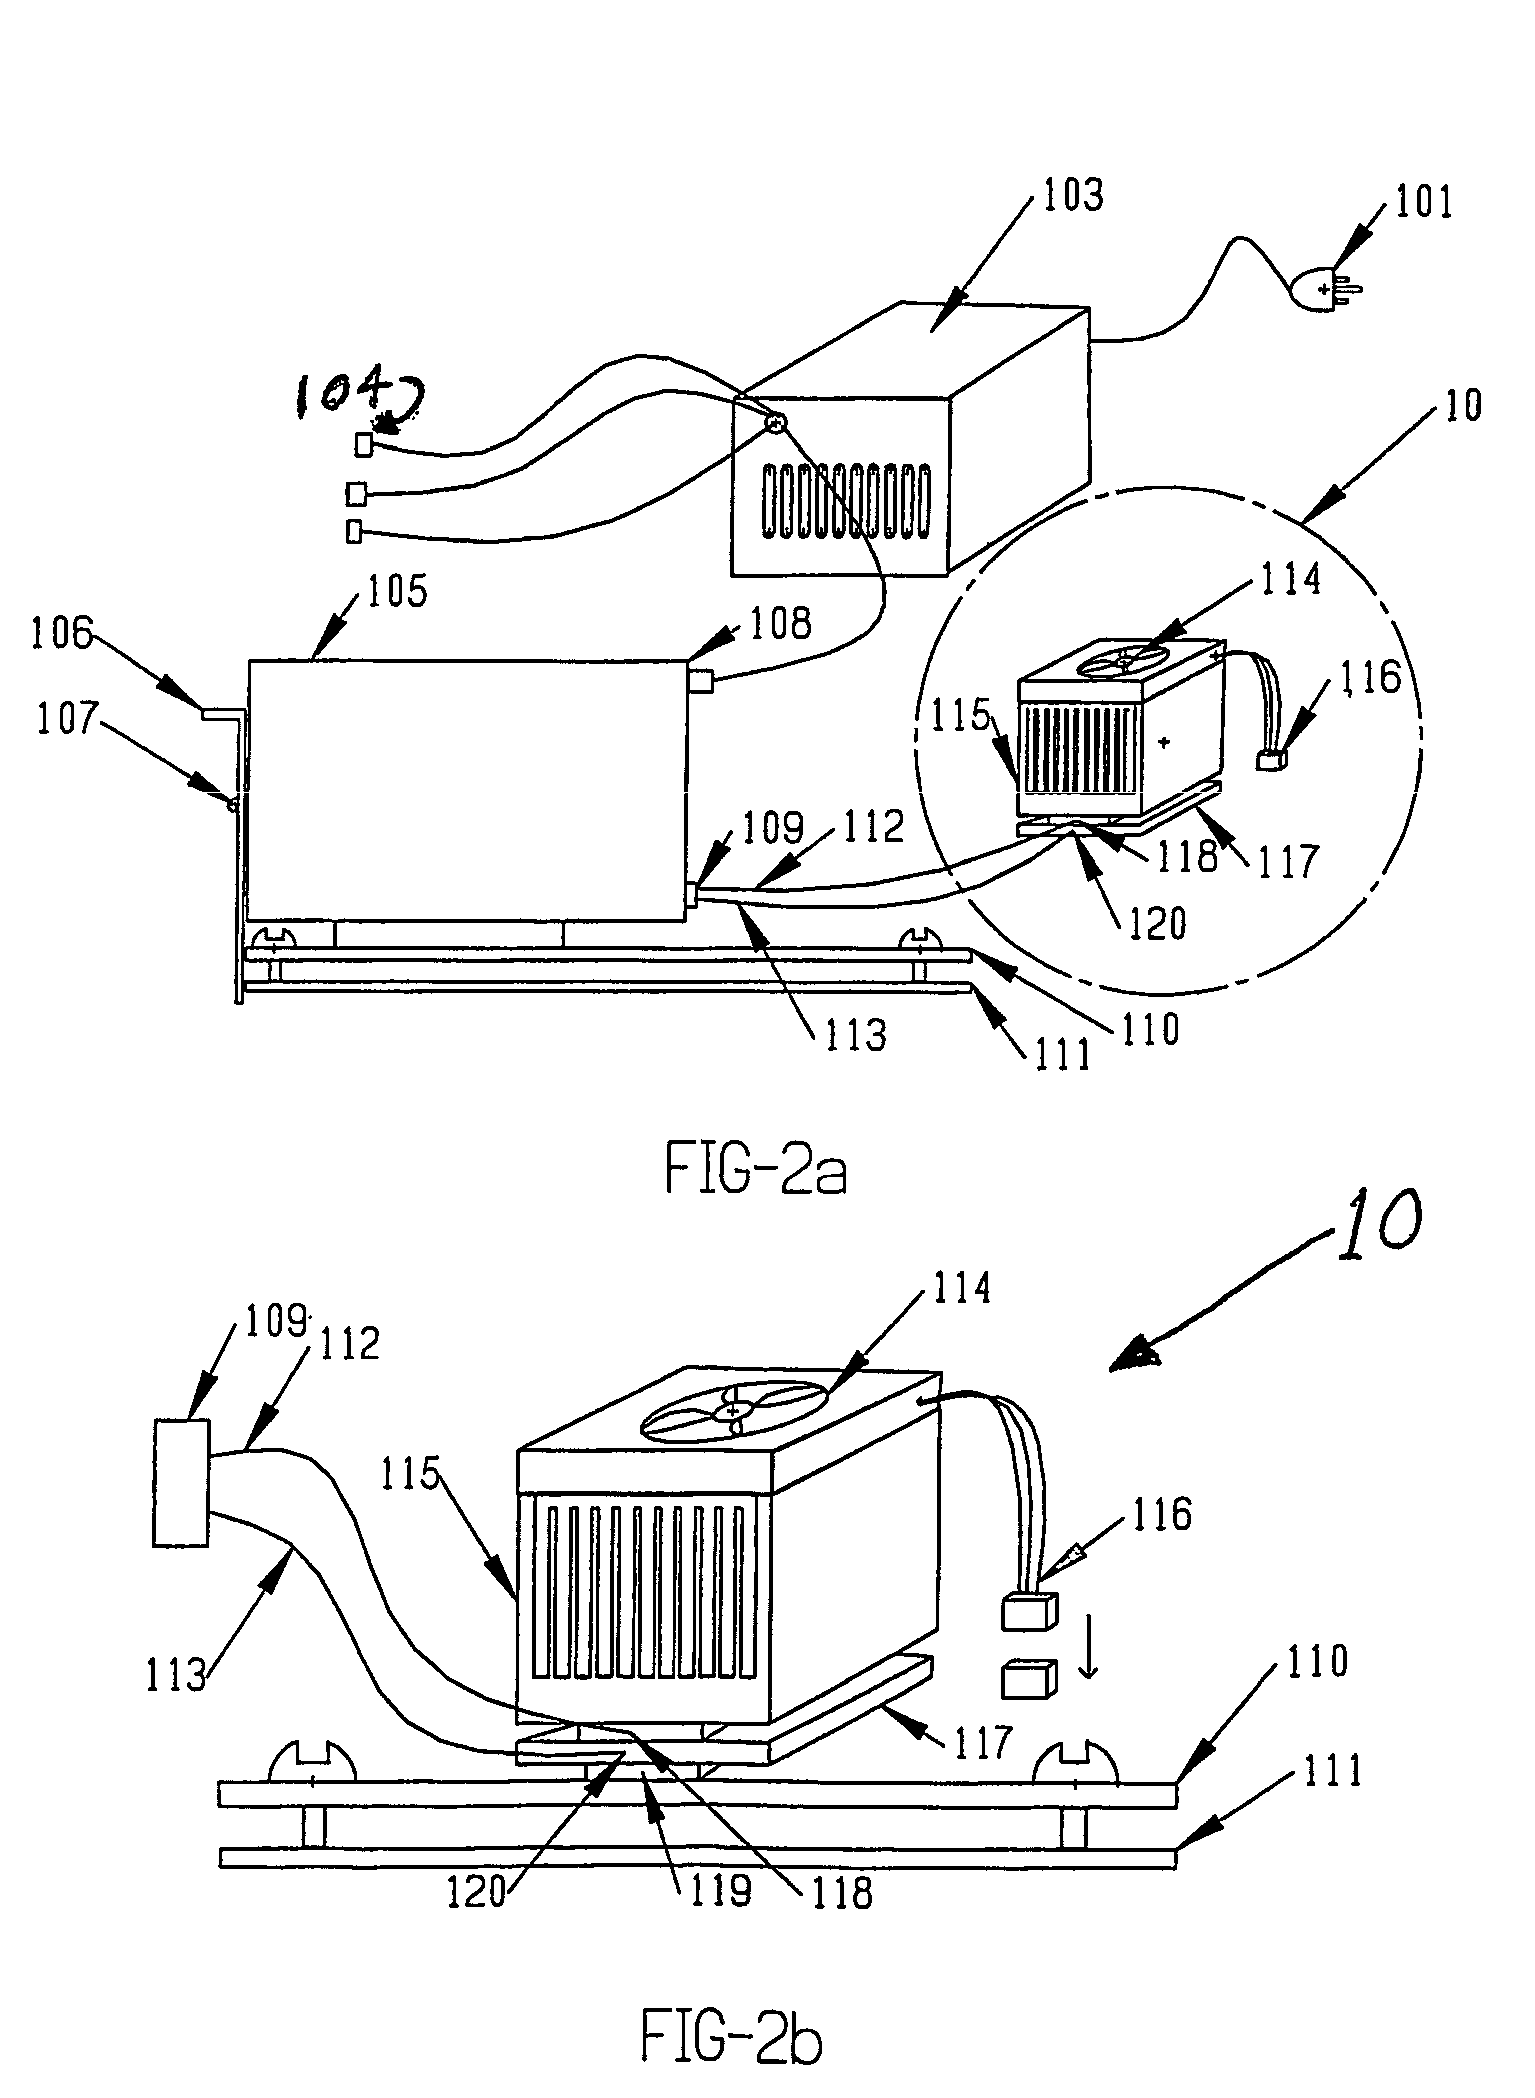 Active cooling system for CPU